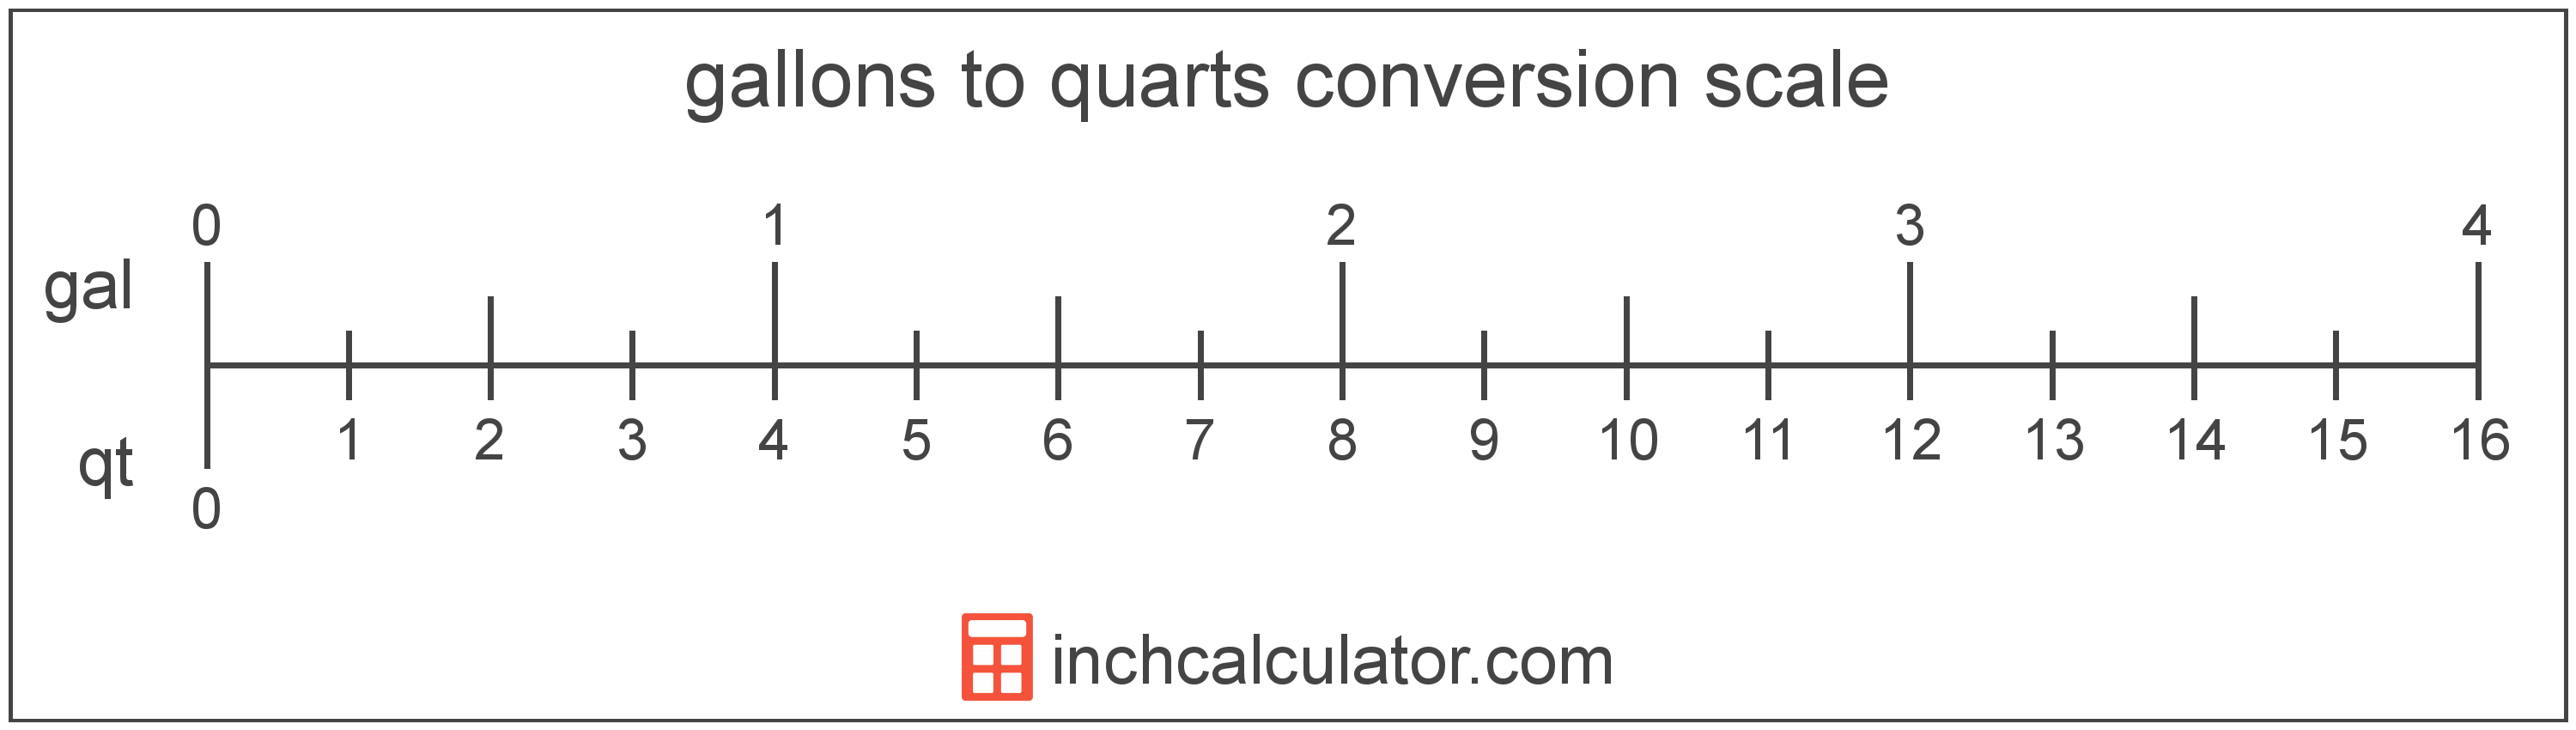 conversion scale showing gallons and equivalent quarts volume values